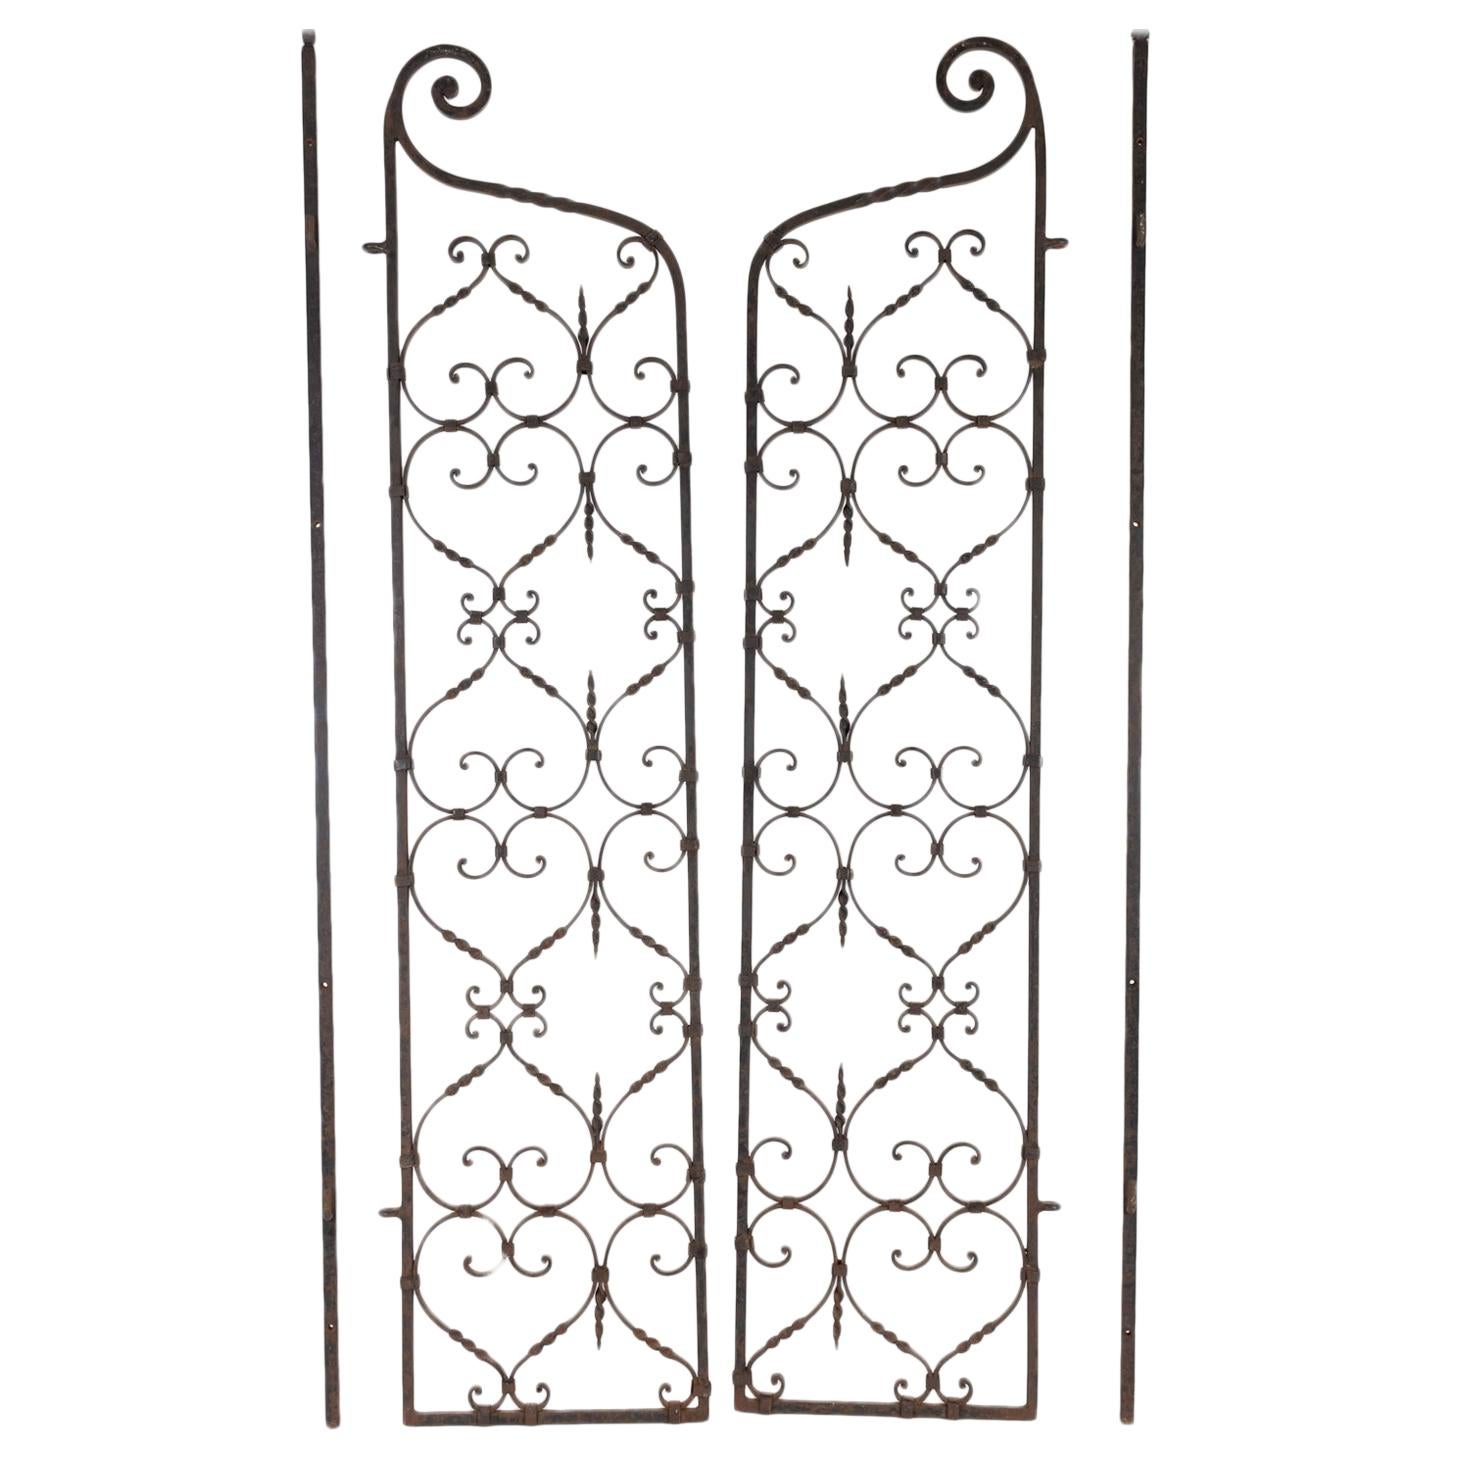 Complete Wrought Iron Interior Grills